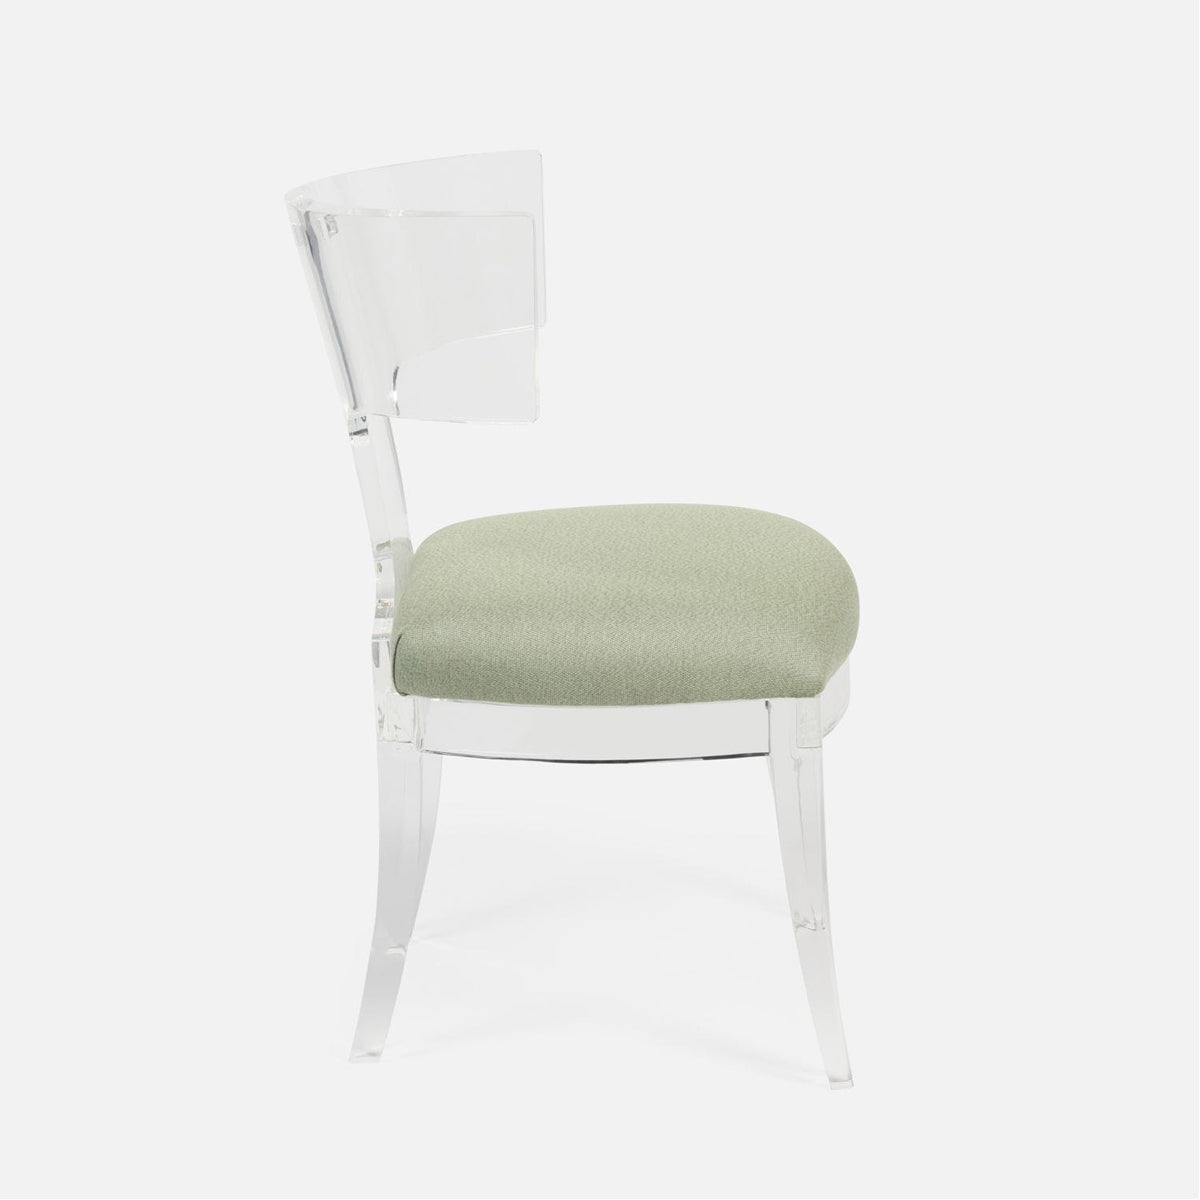 Made Goods Gibson Acrylic Wingback Dining Chair in Pagua Fabric